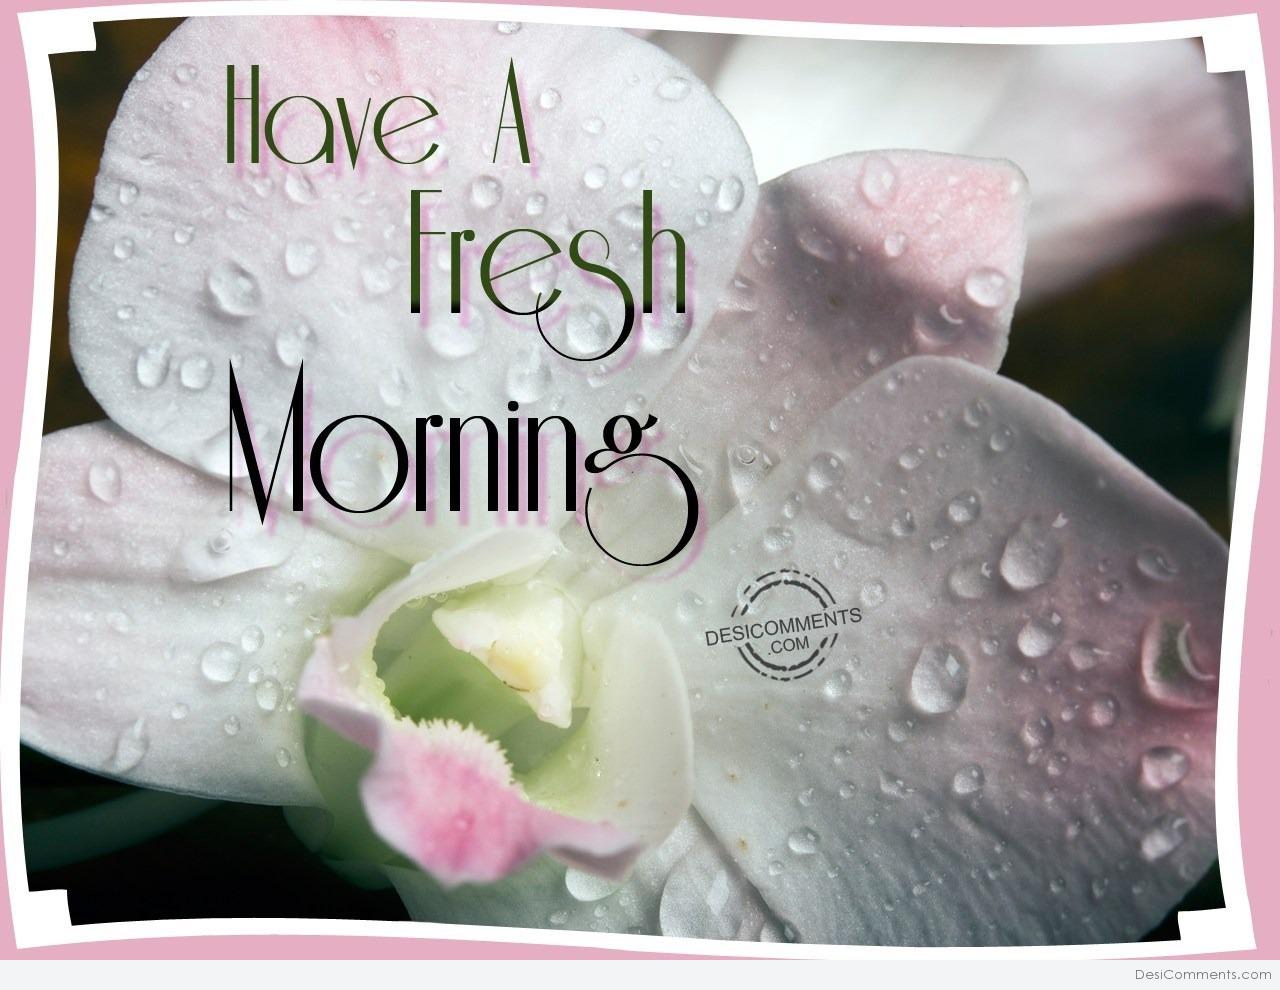 Have a fresh morning - DesiComments.com